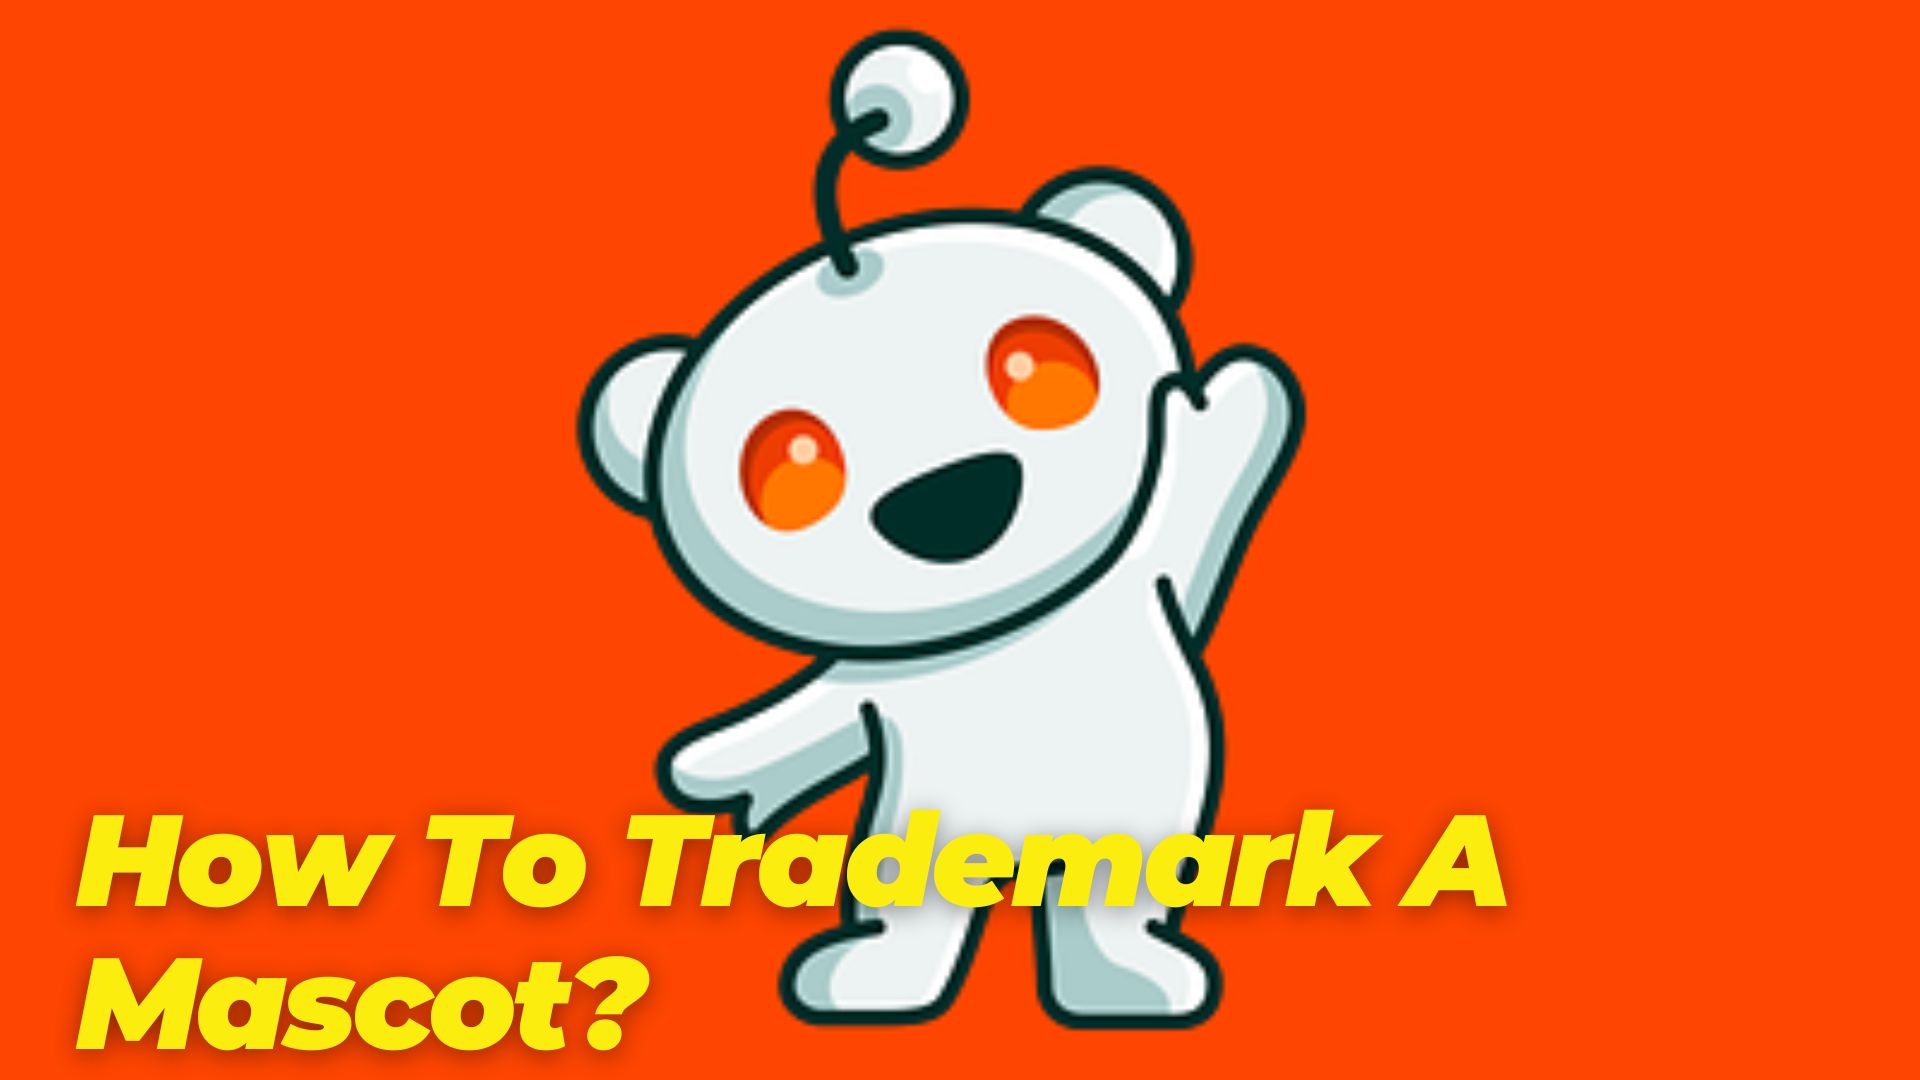 How To Trademark A Mascot?